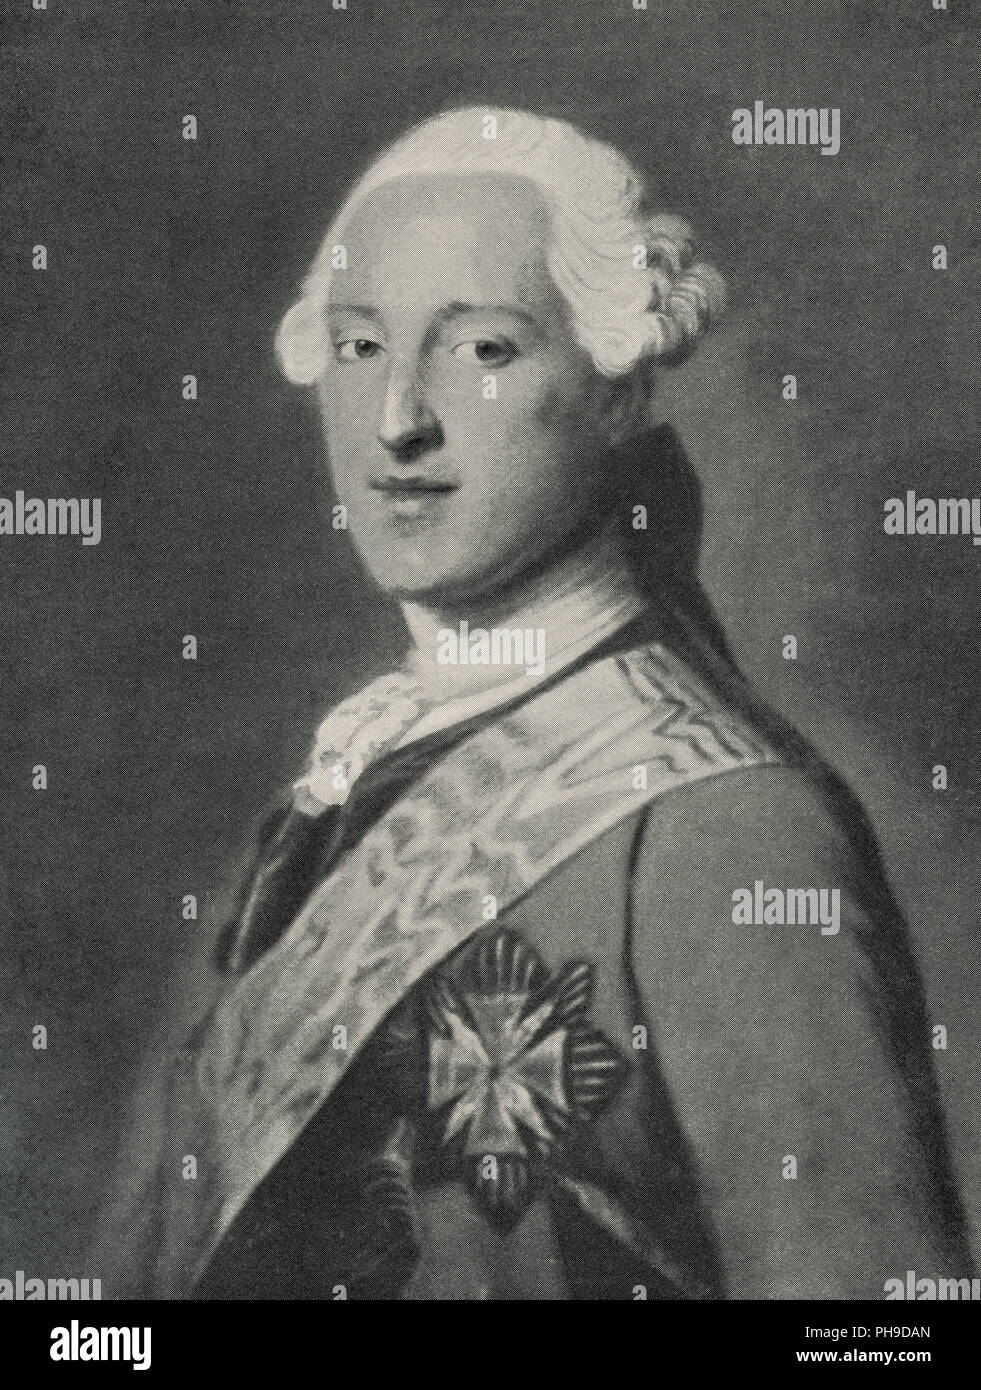 Franz Xavier of Saxony, 1730 – 1806. German prince and member of the House of Wettin. After a work by French Rococo portraitist, Maurice Quentin de La Tour, (1704 – 1788).  From La Tour, published 1920. Stock Photo